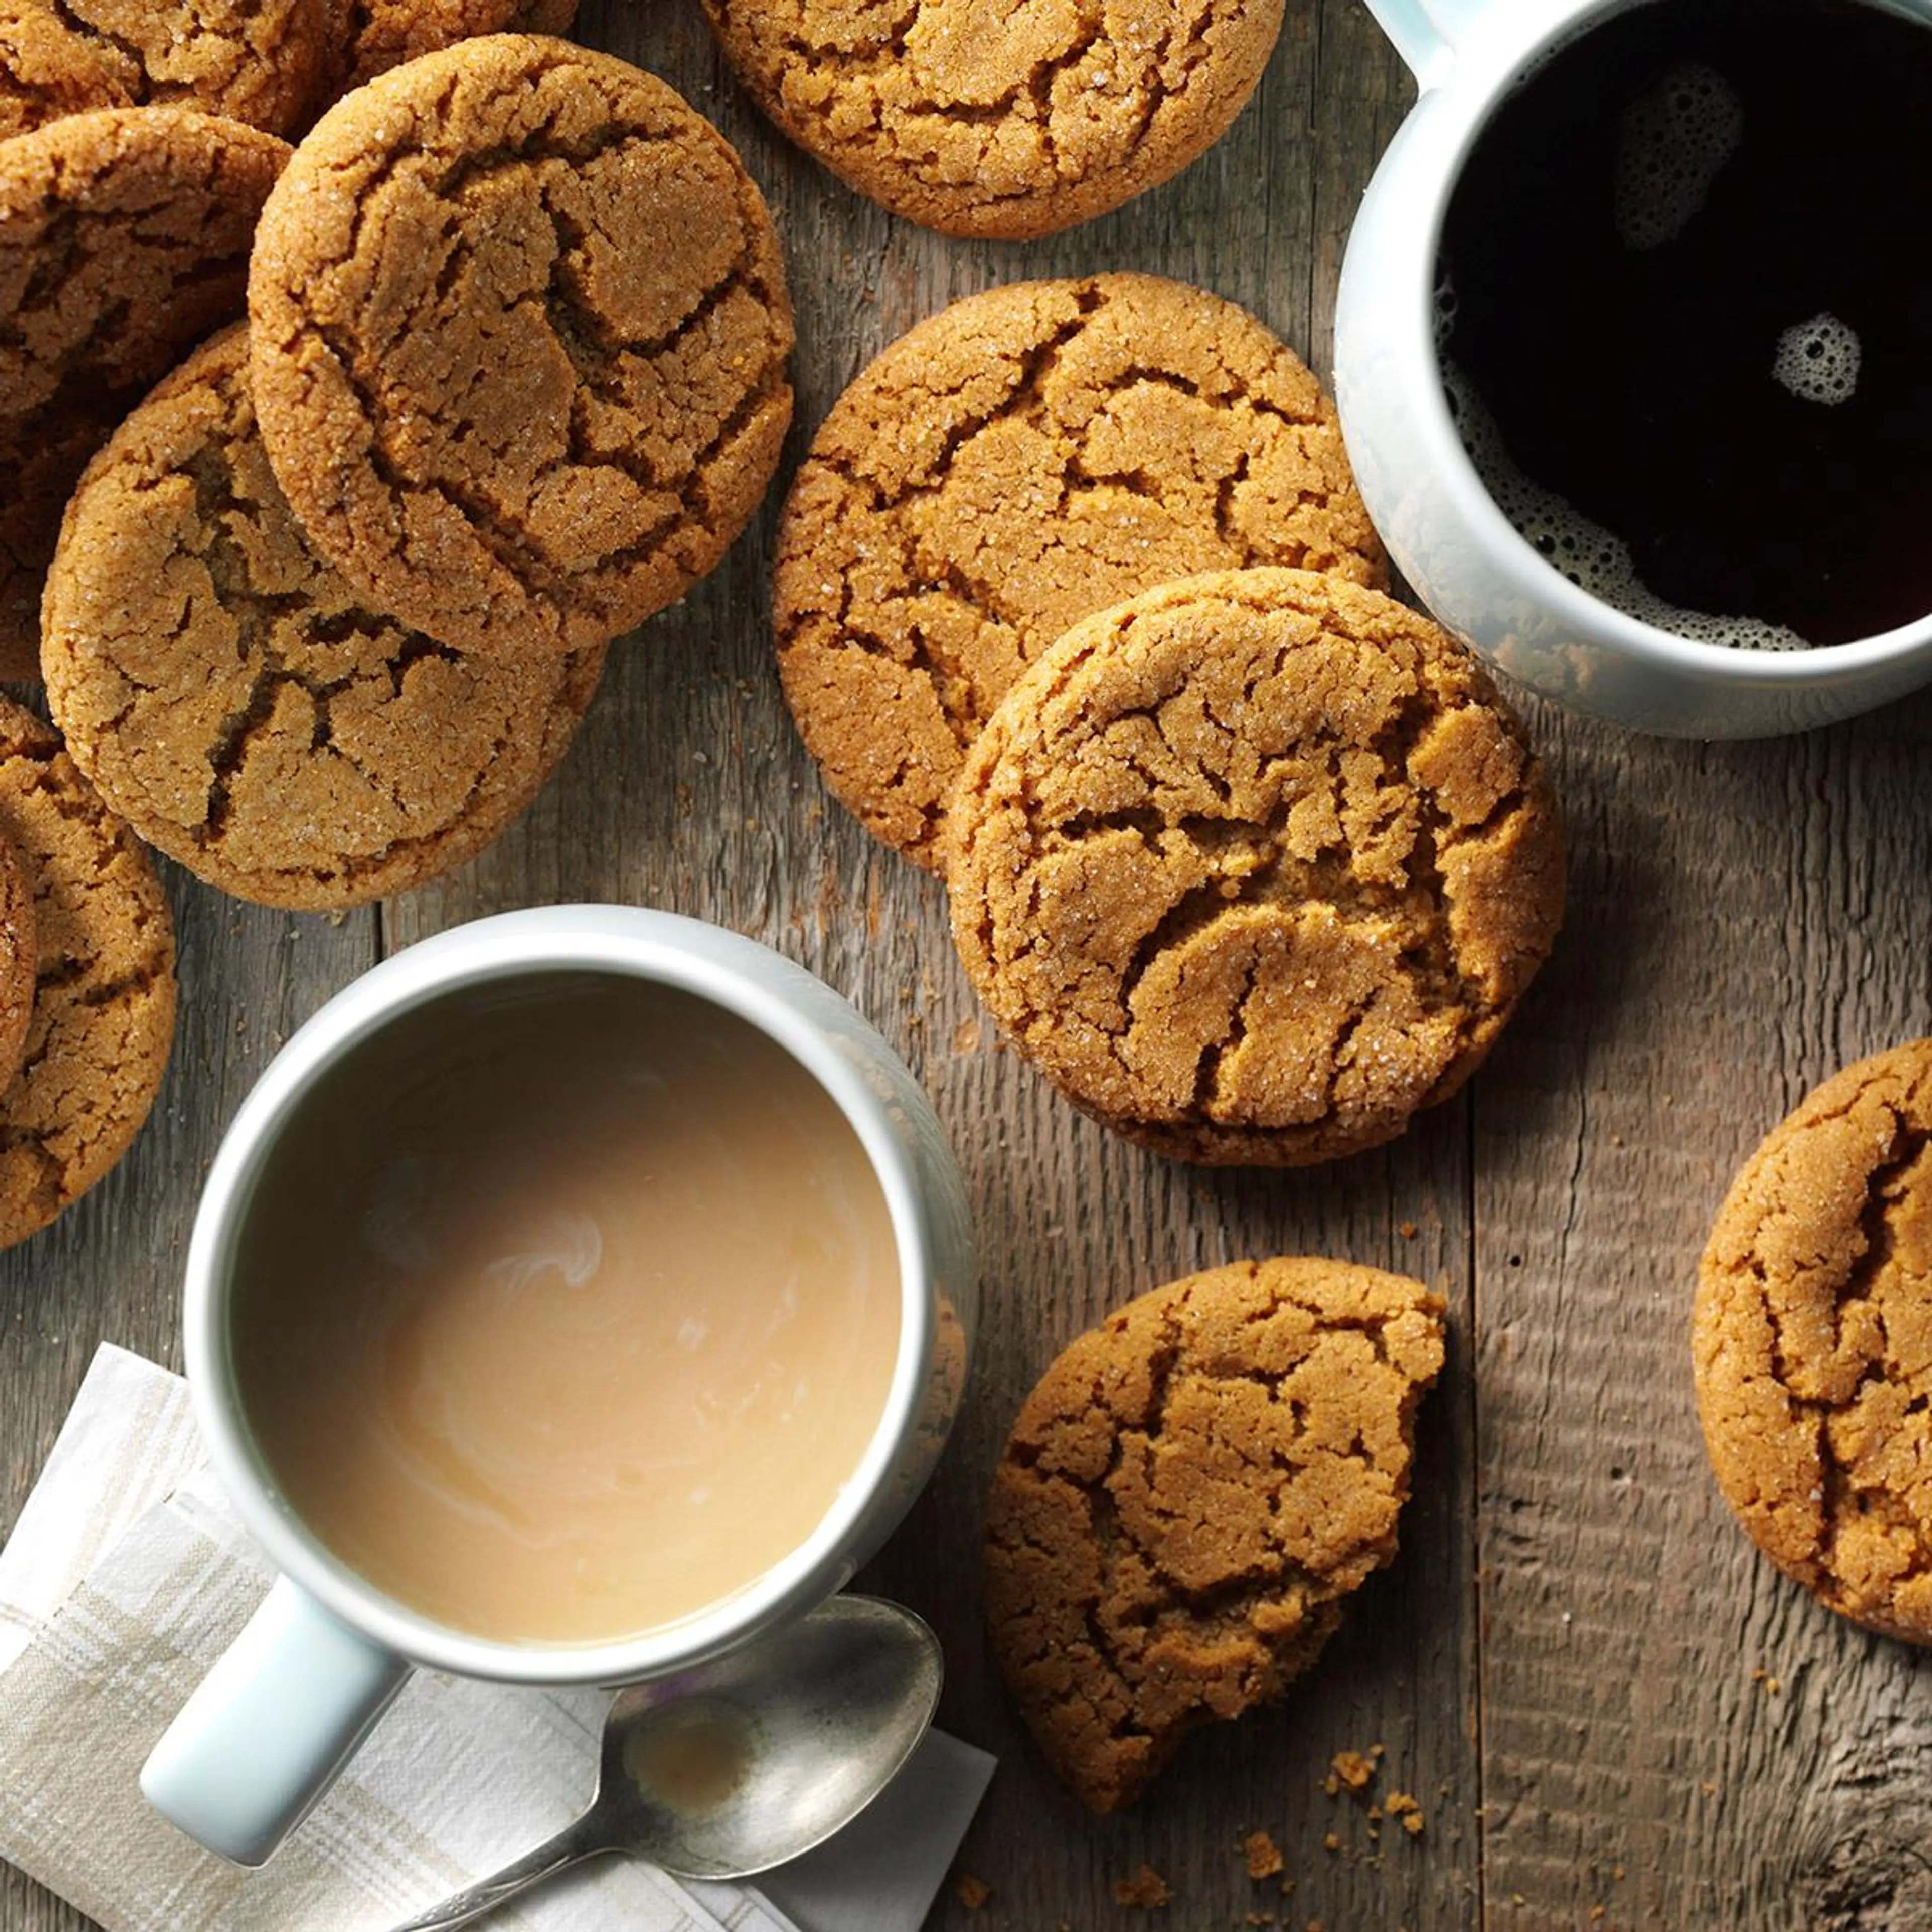 Chewy Ginger Cookies